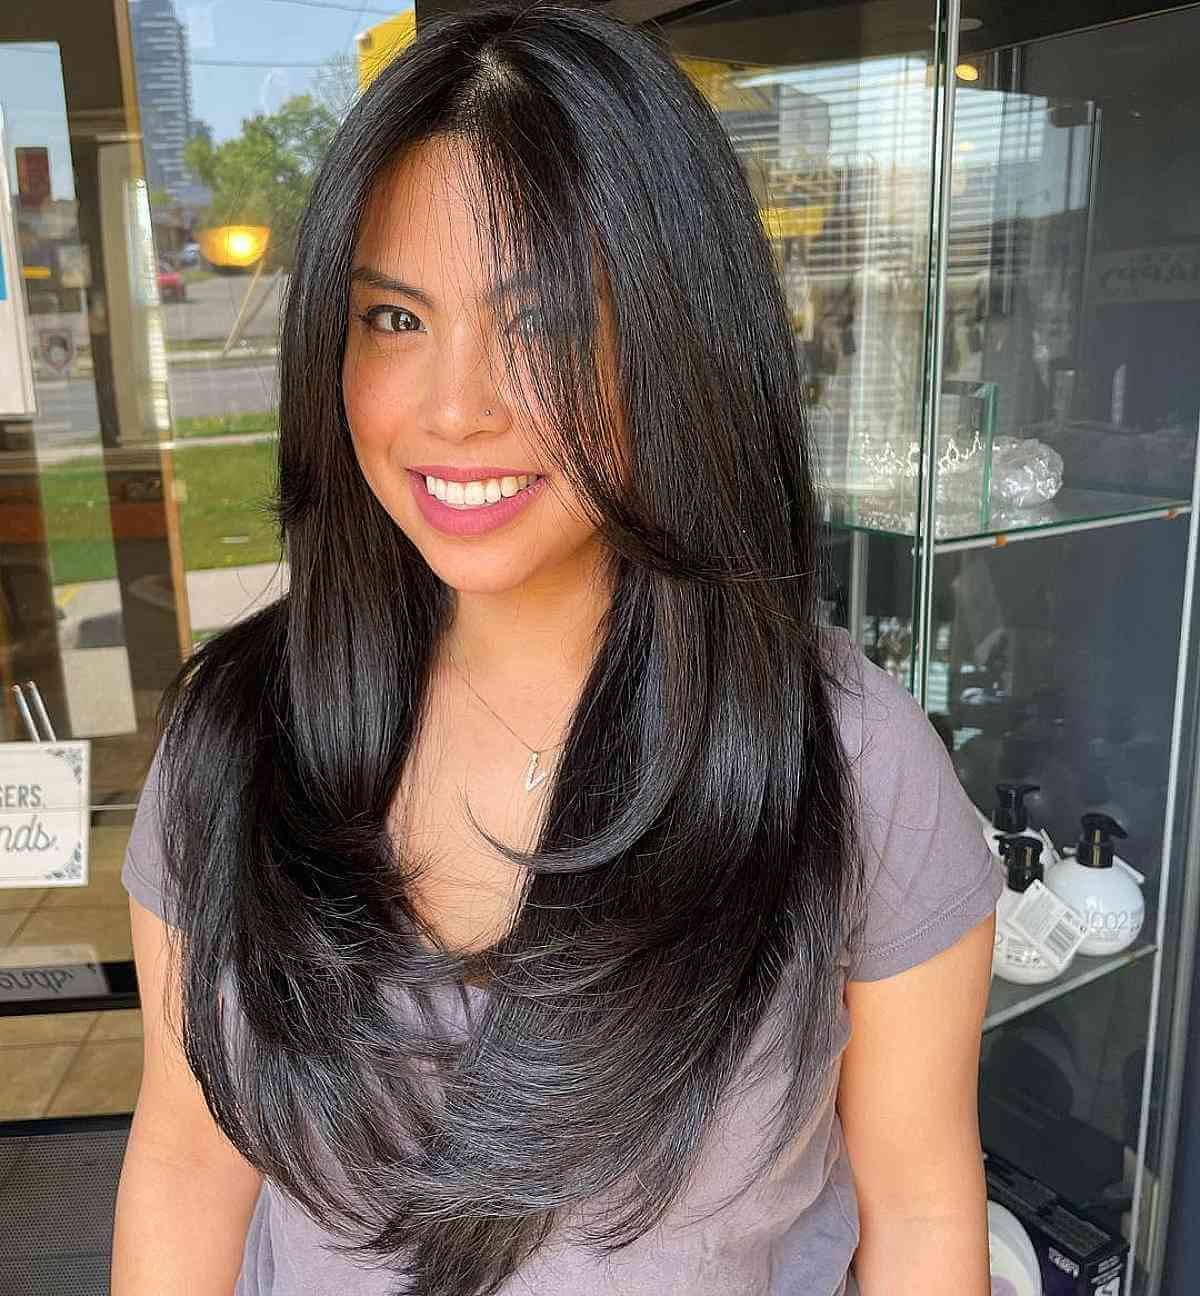 Long Hairstyle for Oval face Shape 13 Egg shaped head hairstyles female | Long bob haircut for oval face | Long Hairstyles for Oval Face Shape Long Hairstyles for Oval Face Shape Women